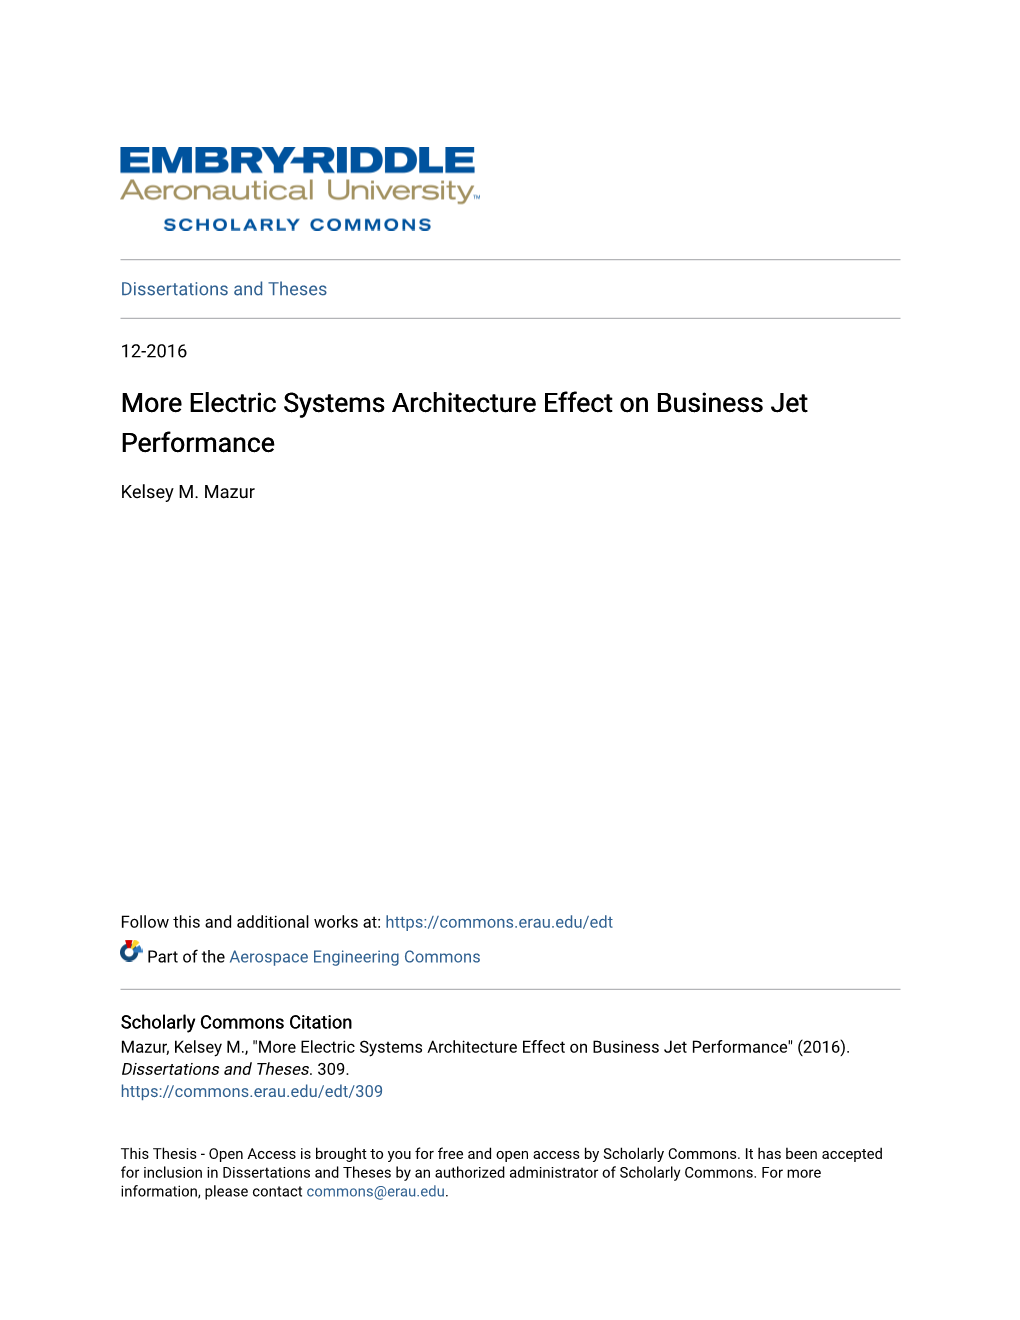 More Electric Systems Architecture Effect on Business Jet Performance